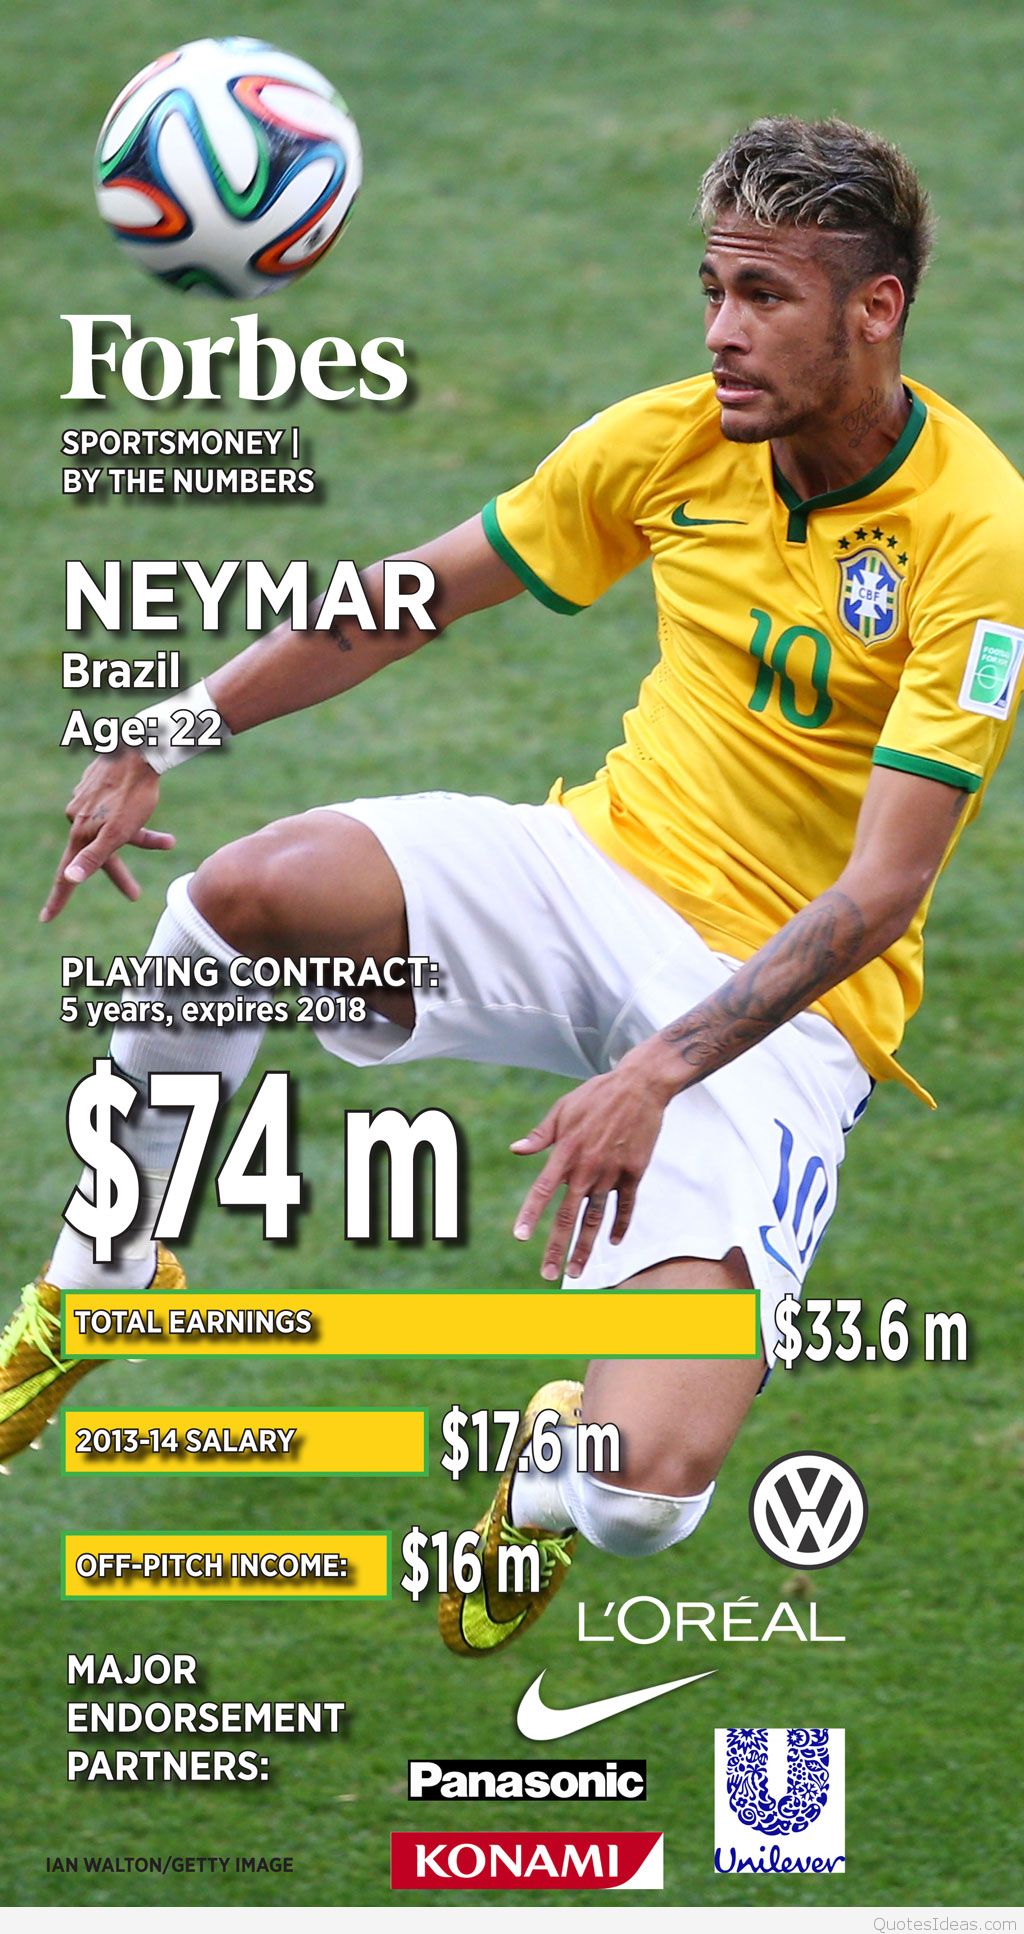 0702 Sports Money Soccer Neymar Infographic - Quote For Soccer By Neymar - HD Wallpaper 